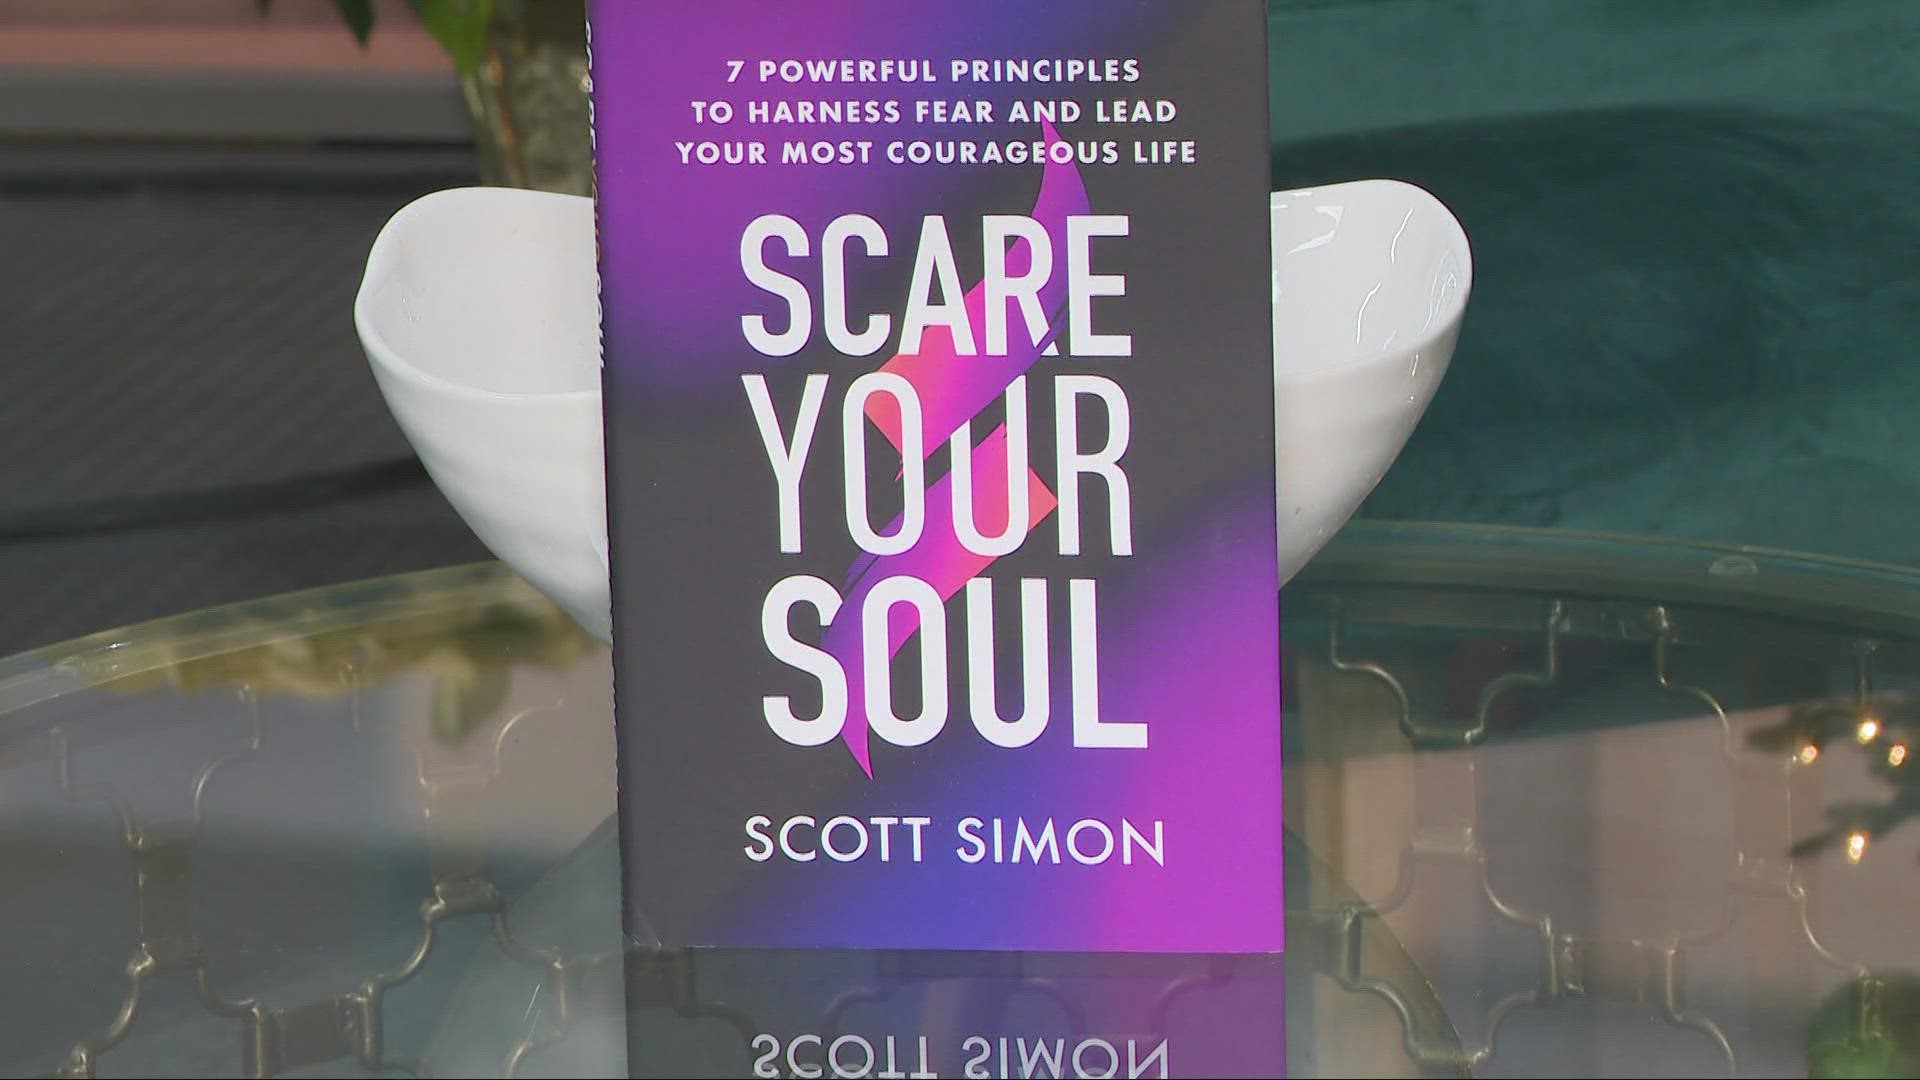 The book sums up the "Scare your Soul" movement created by Scott Simon